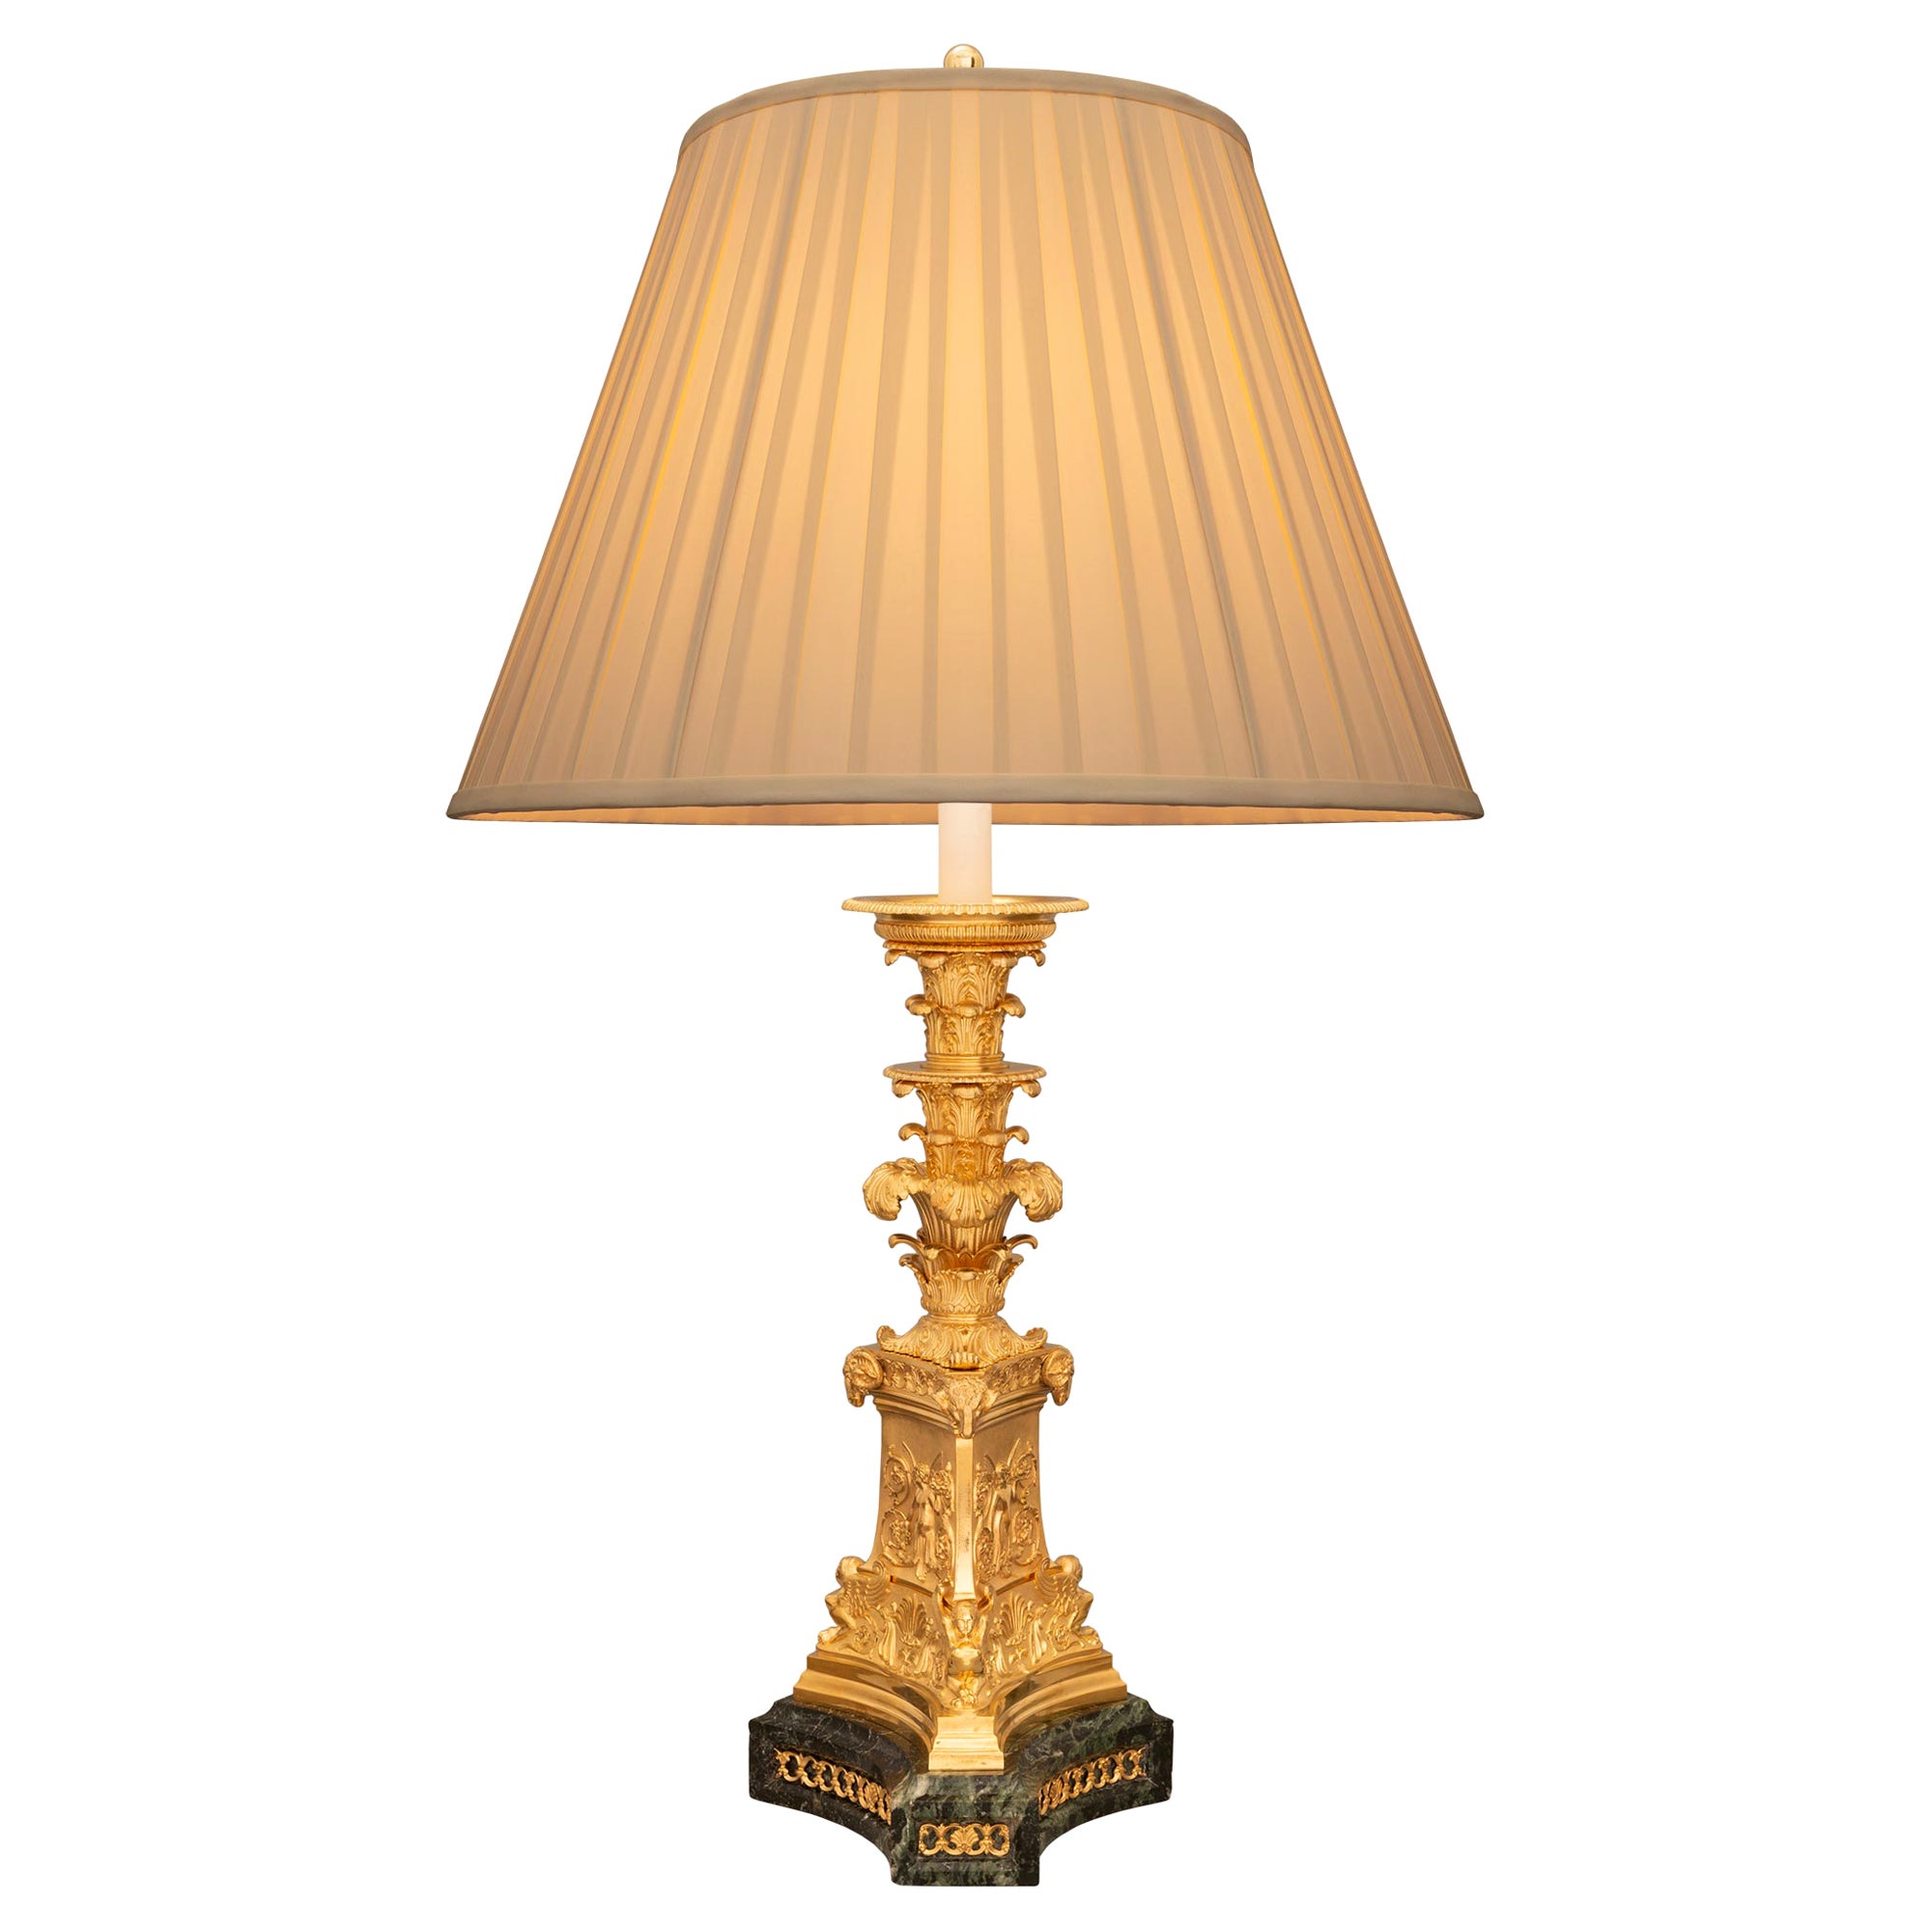 French 19th Century Empire St. Belle Époque Period Marble and Ormolu Lamp